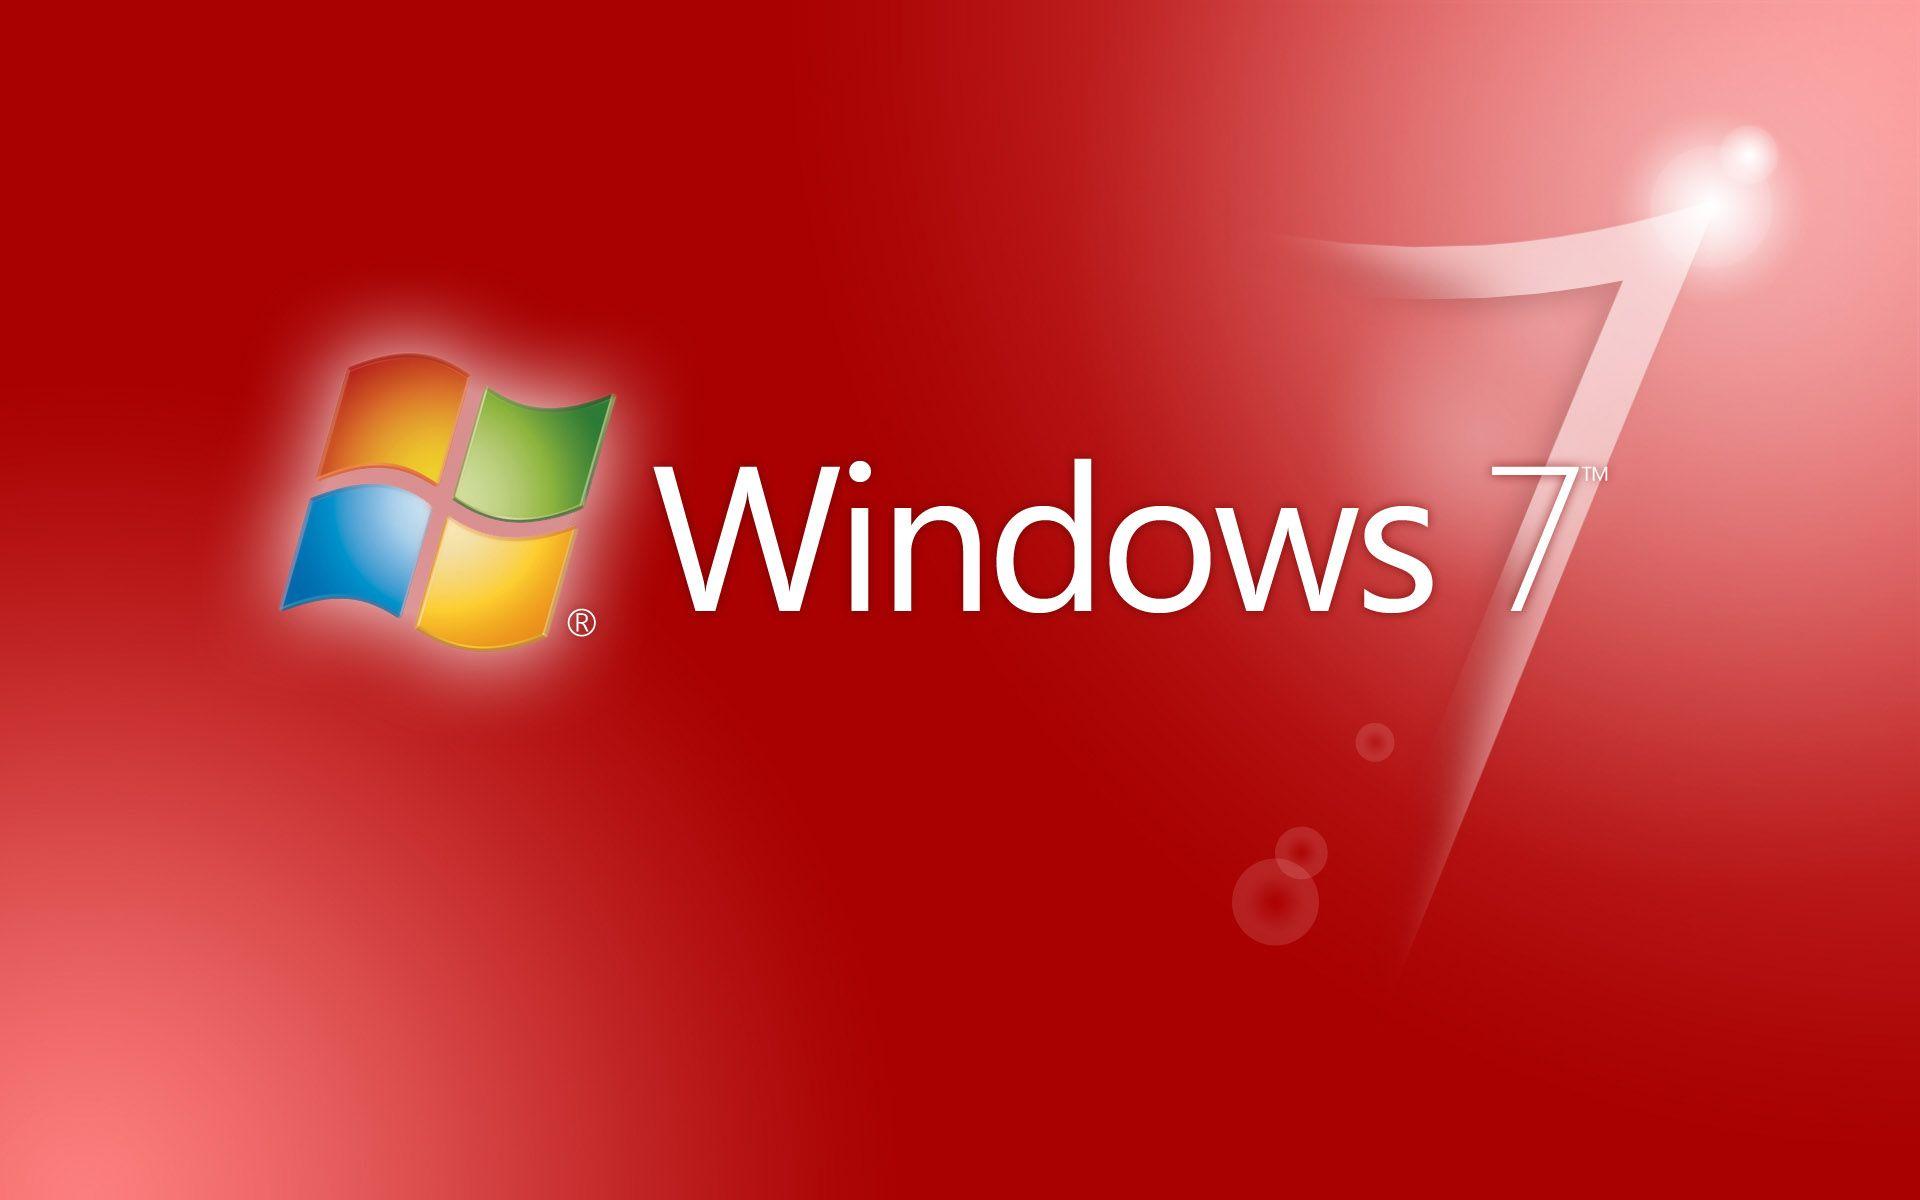 Microsoft To End Support For Windows 7 By 2015. microsoftsupportnow